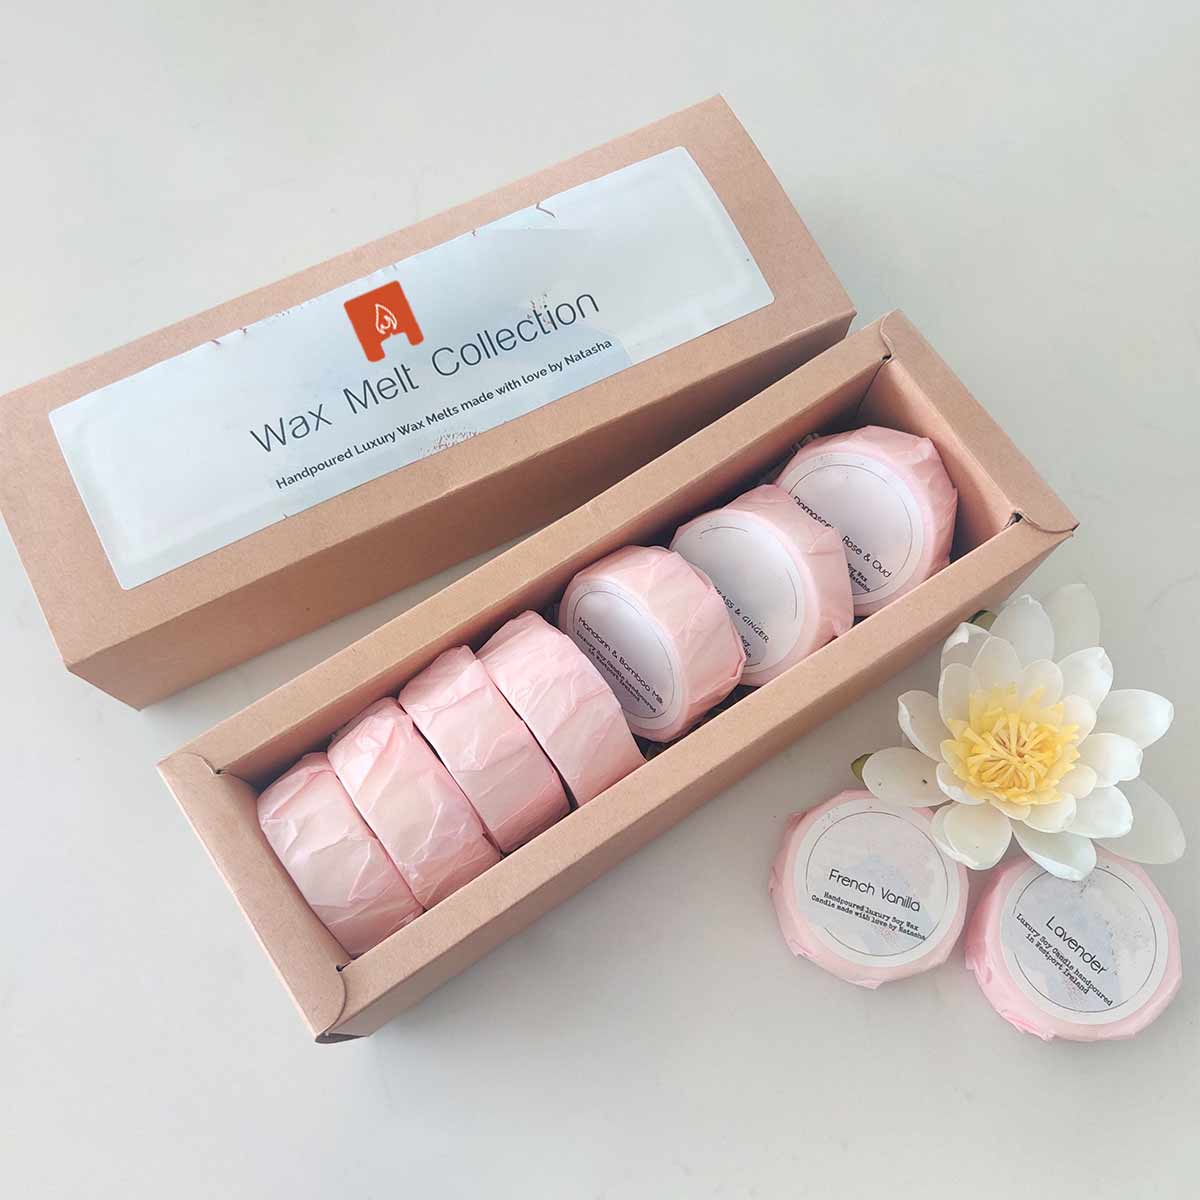 Luxury Wholesale Wax Melt Storage Sample Cardboard Wax Melts Gift Candles  Melts Packaging Boxes For Wax